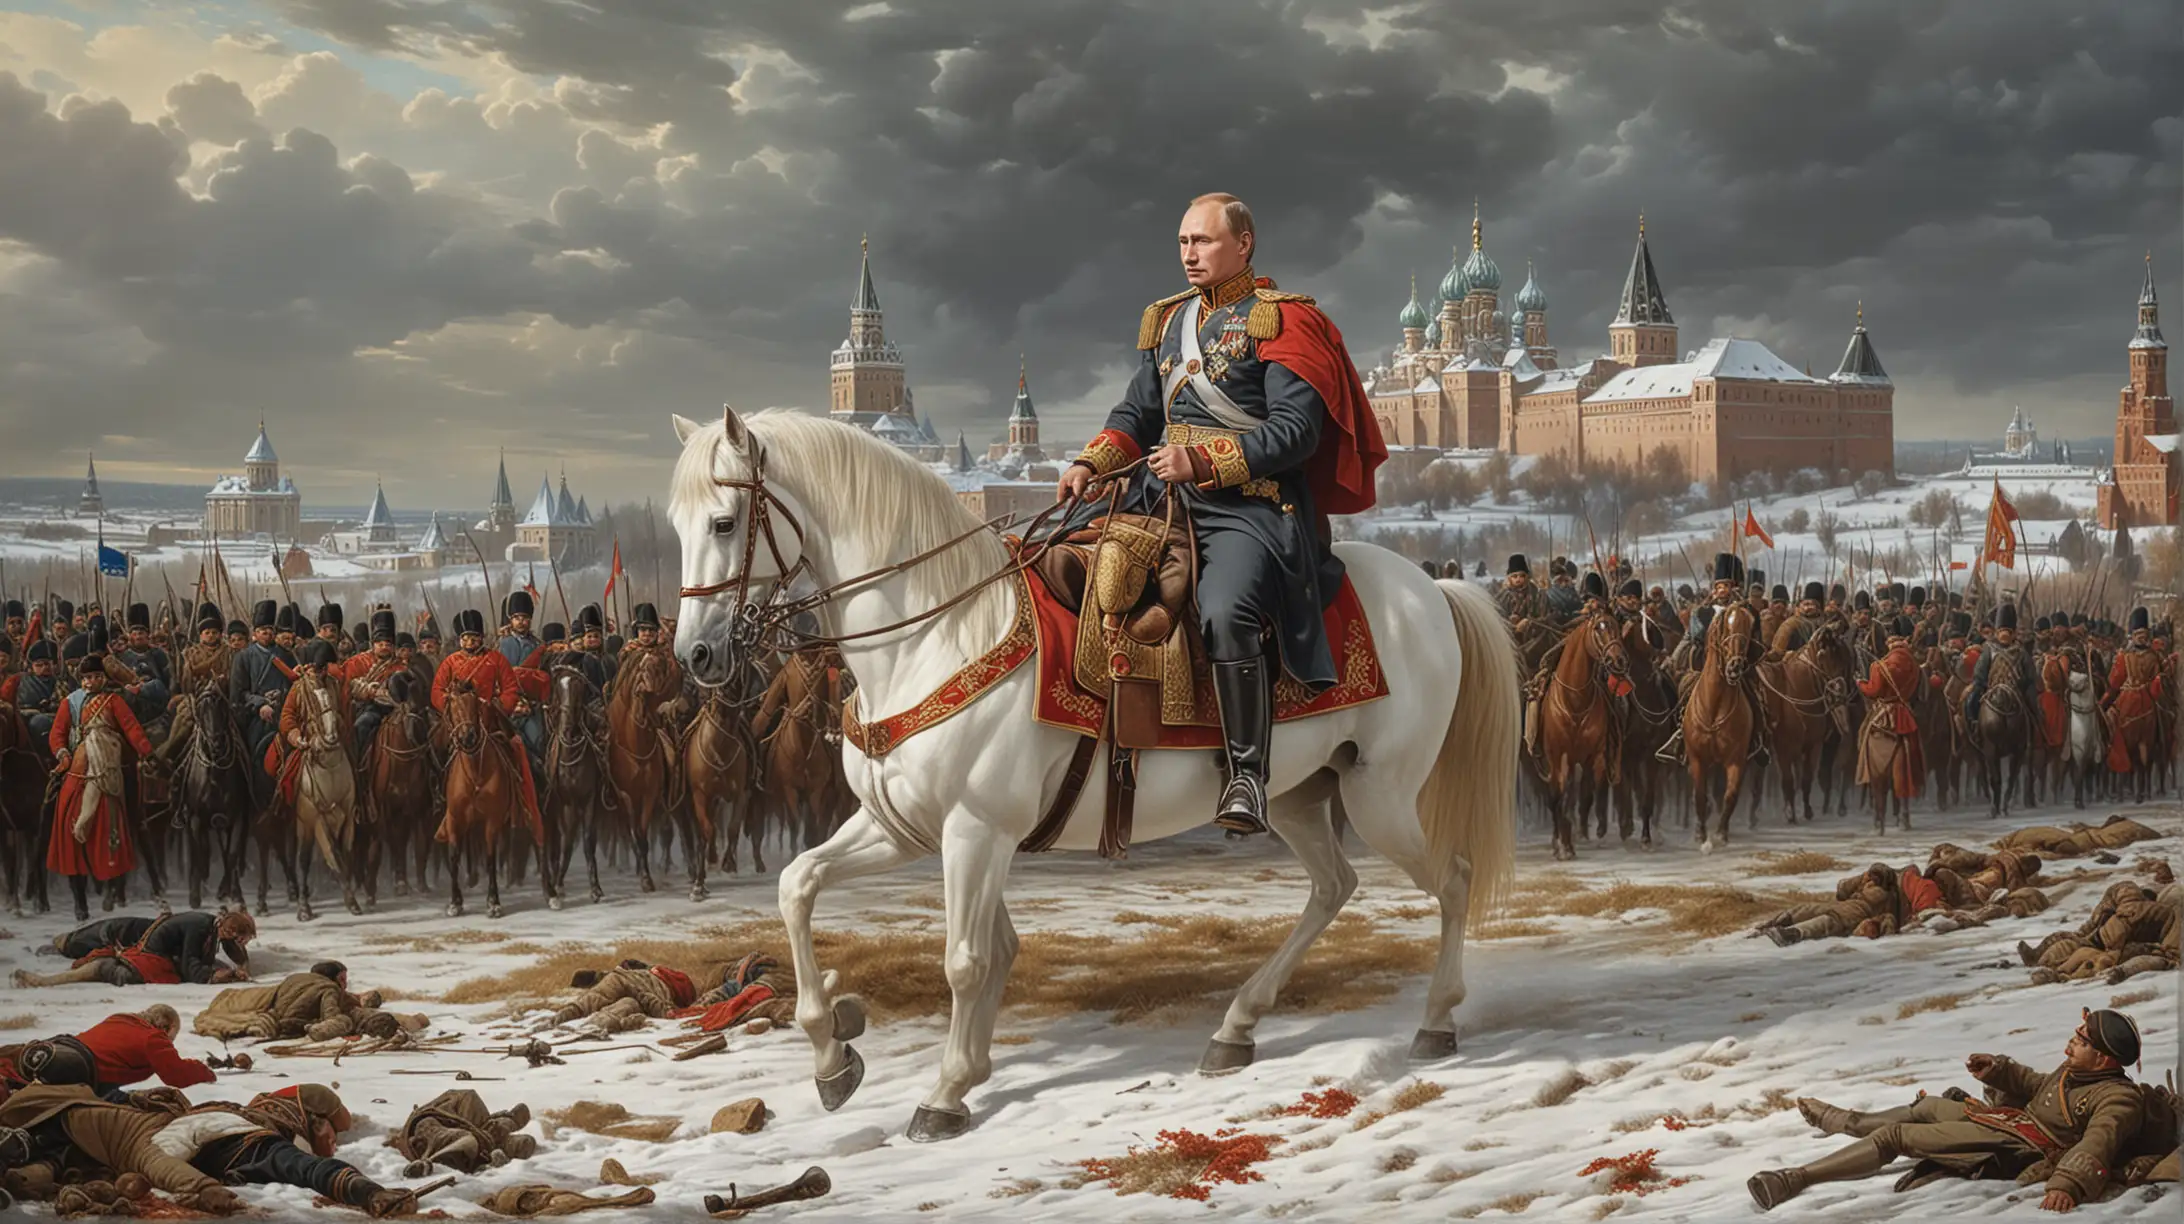 Vladimir Putin on a horsecimpersonating Napoleon's Retreat From Russia from German painter Adolph Northen with the Kremlin in the background the field is littered with corpses